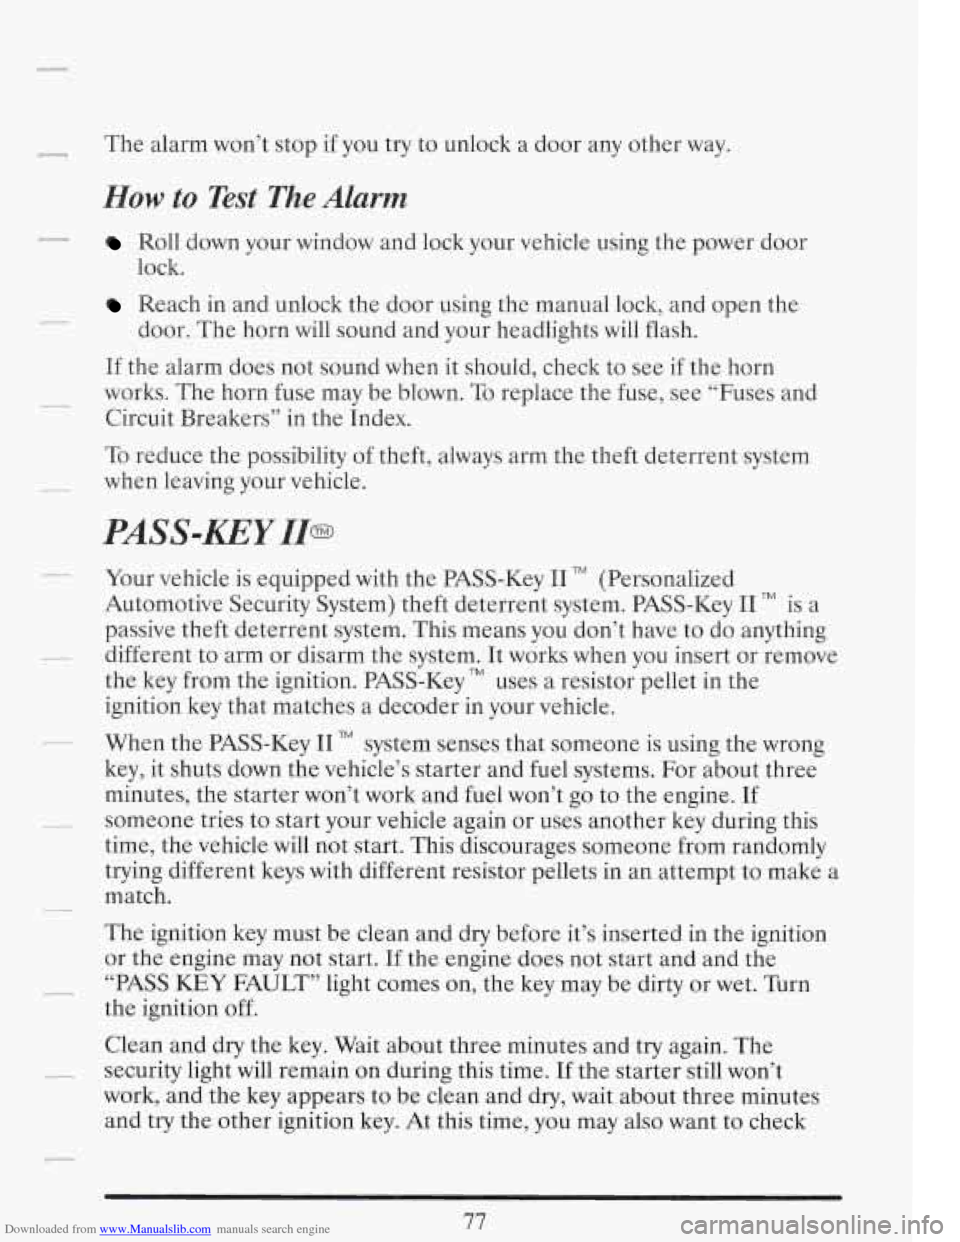 CADILLAC FLEETWOOD 1993 2.G Owners Manual Downloaded from www.Manualslib.com manuals search engine r The alarm  won’t stop if you  try  to unlock  a  door any other  way. 
How to Test The Alarm 
Roll down  your window  and lock  your vehicl